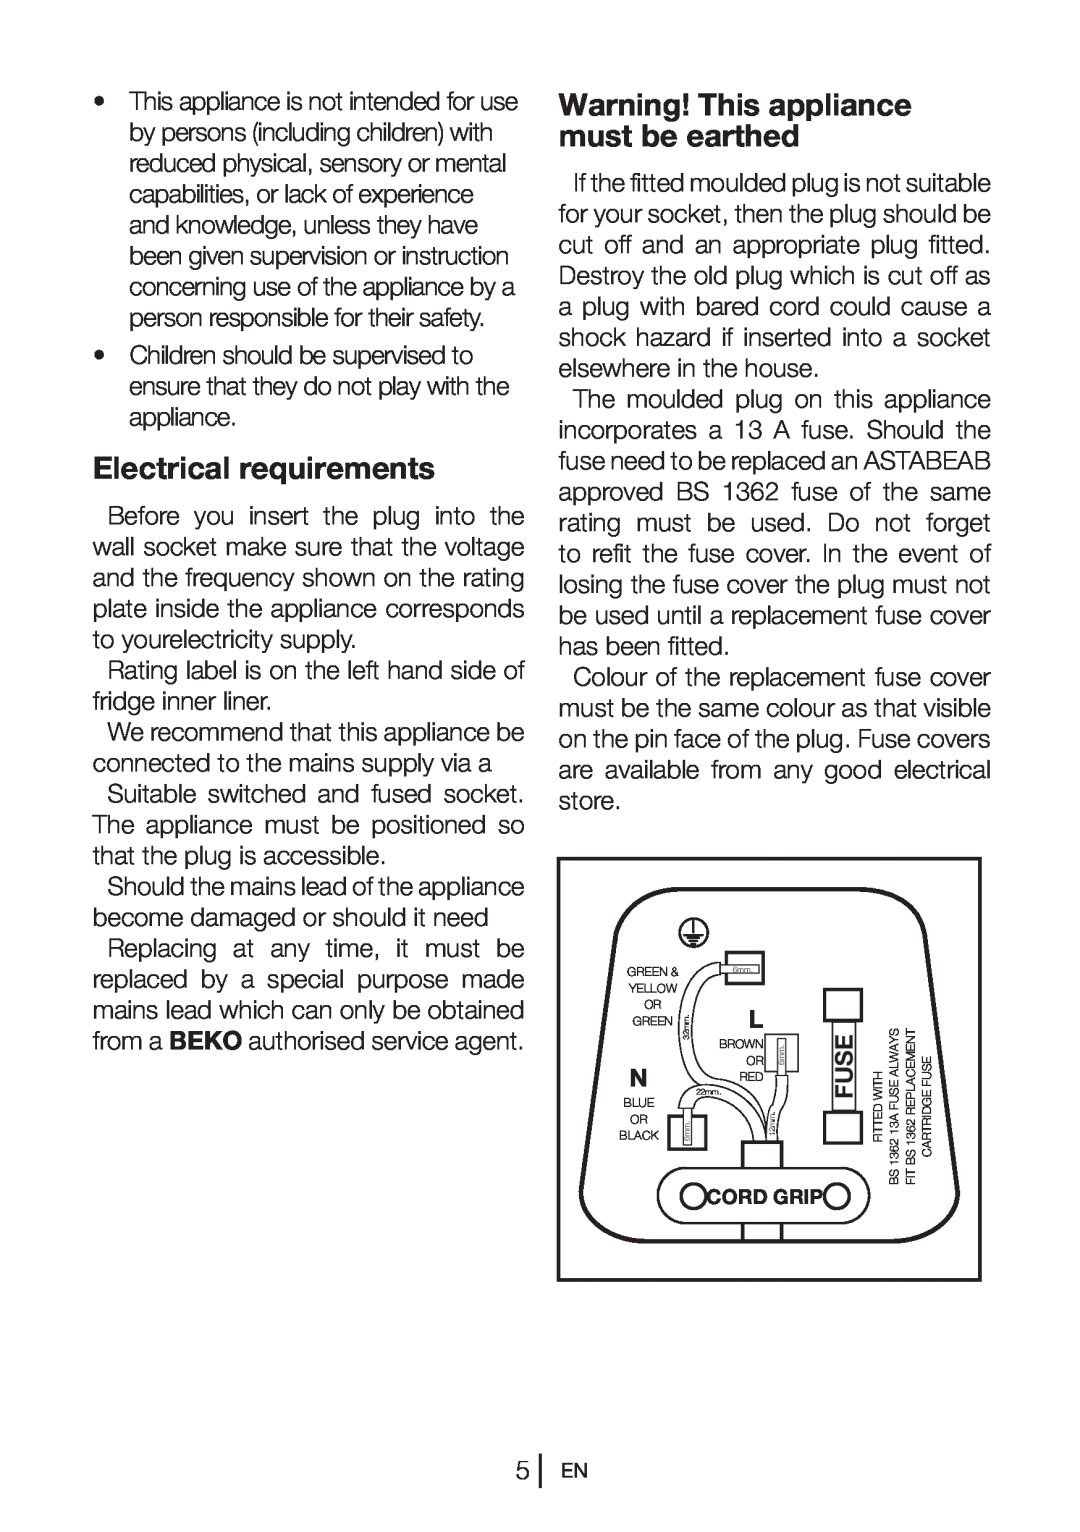 Beko ULC532W, UL483APW manual Electrical requirements, Warning! This appliance must be earthed, Fuse 